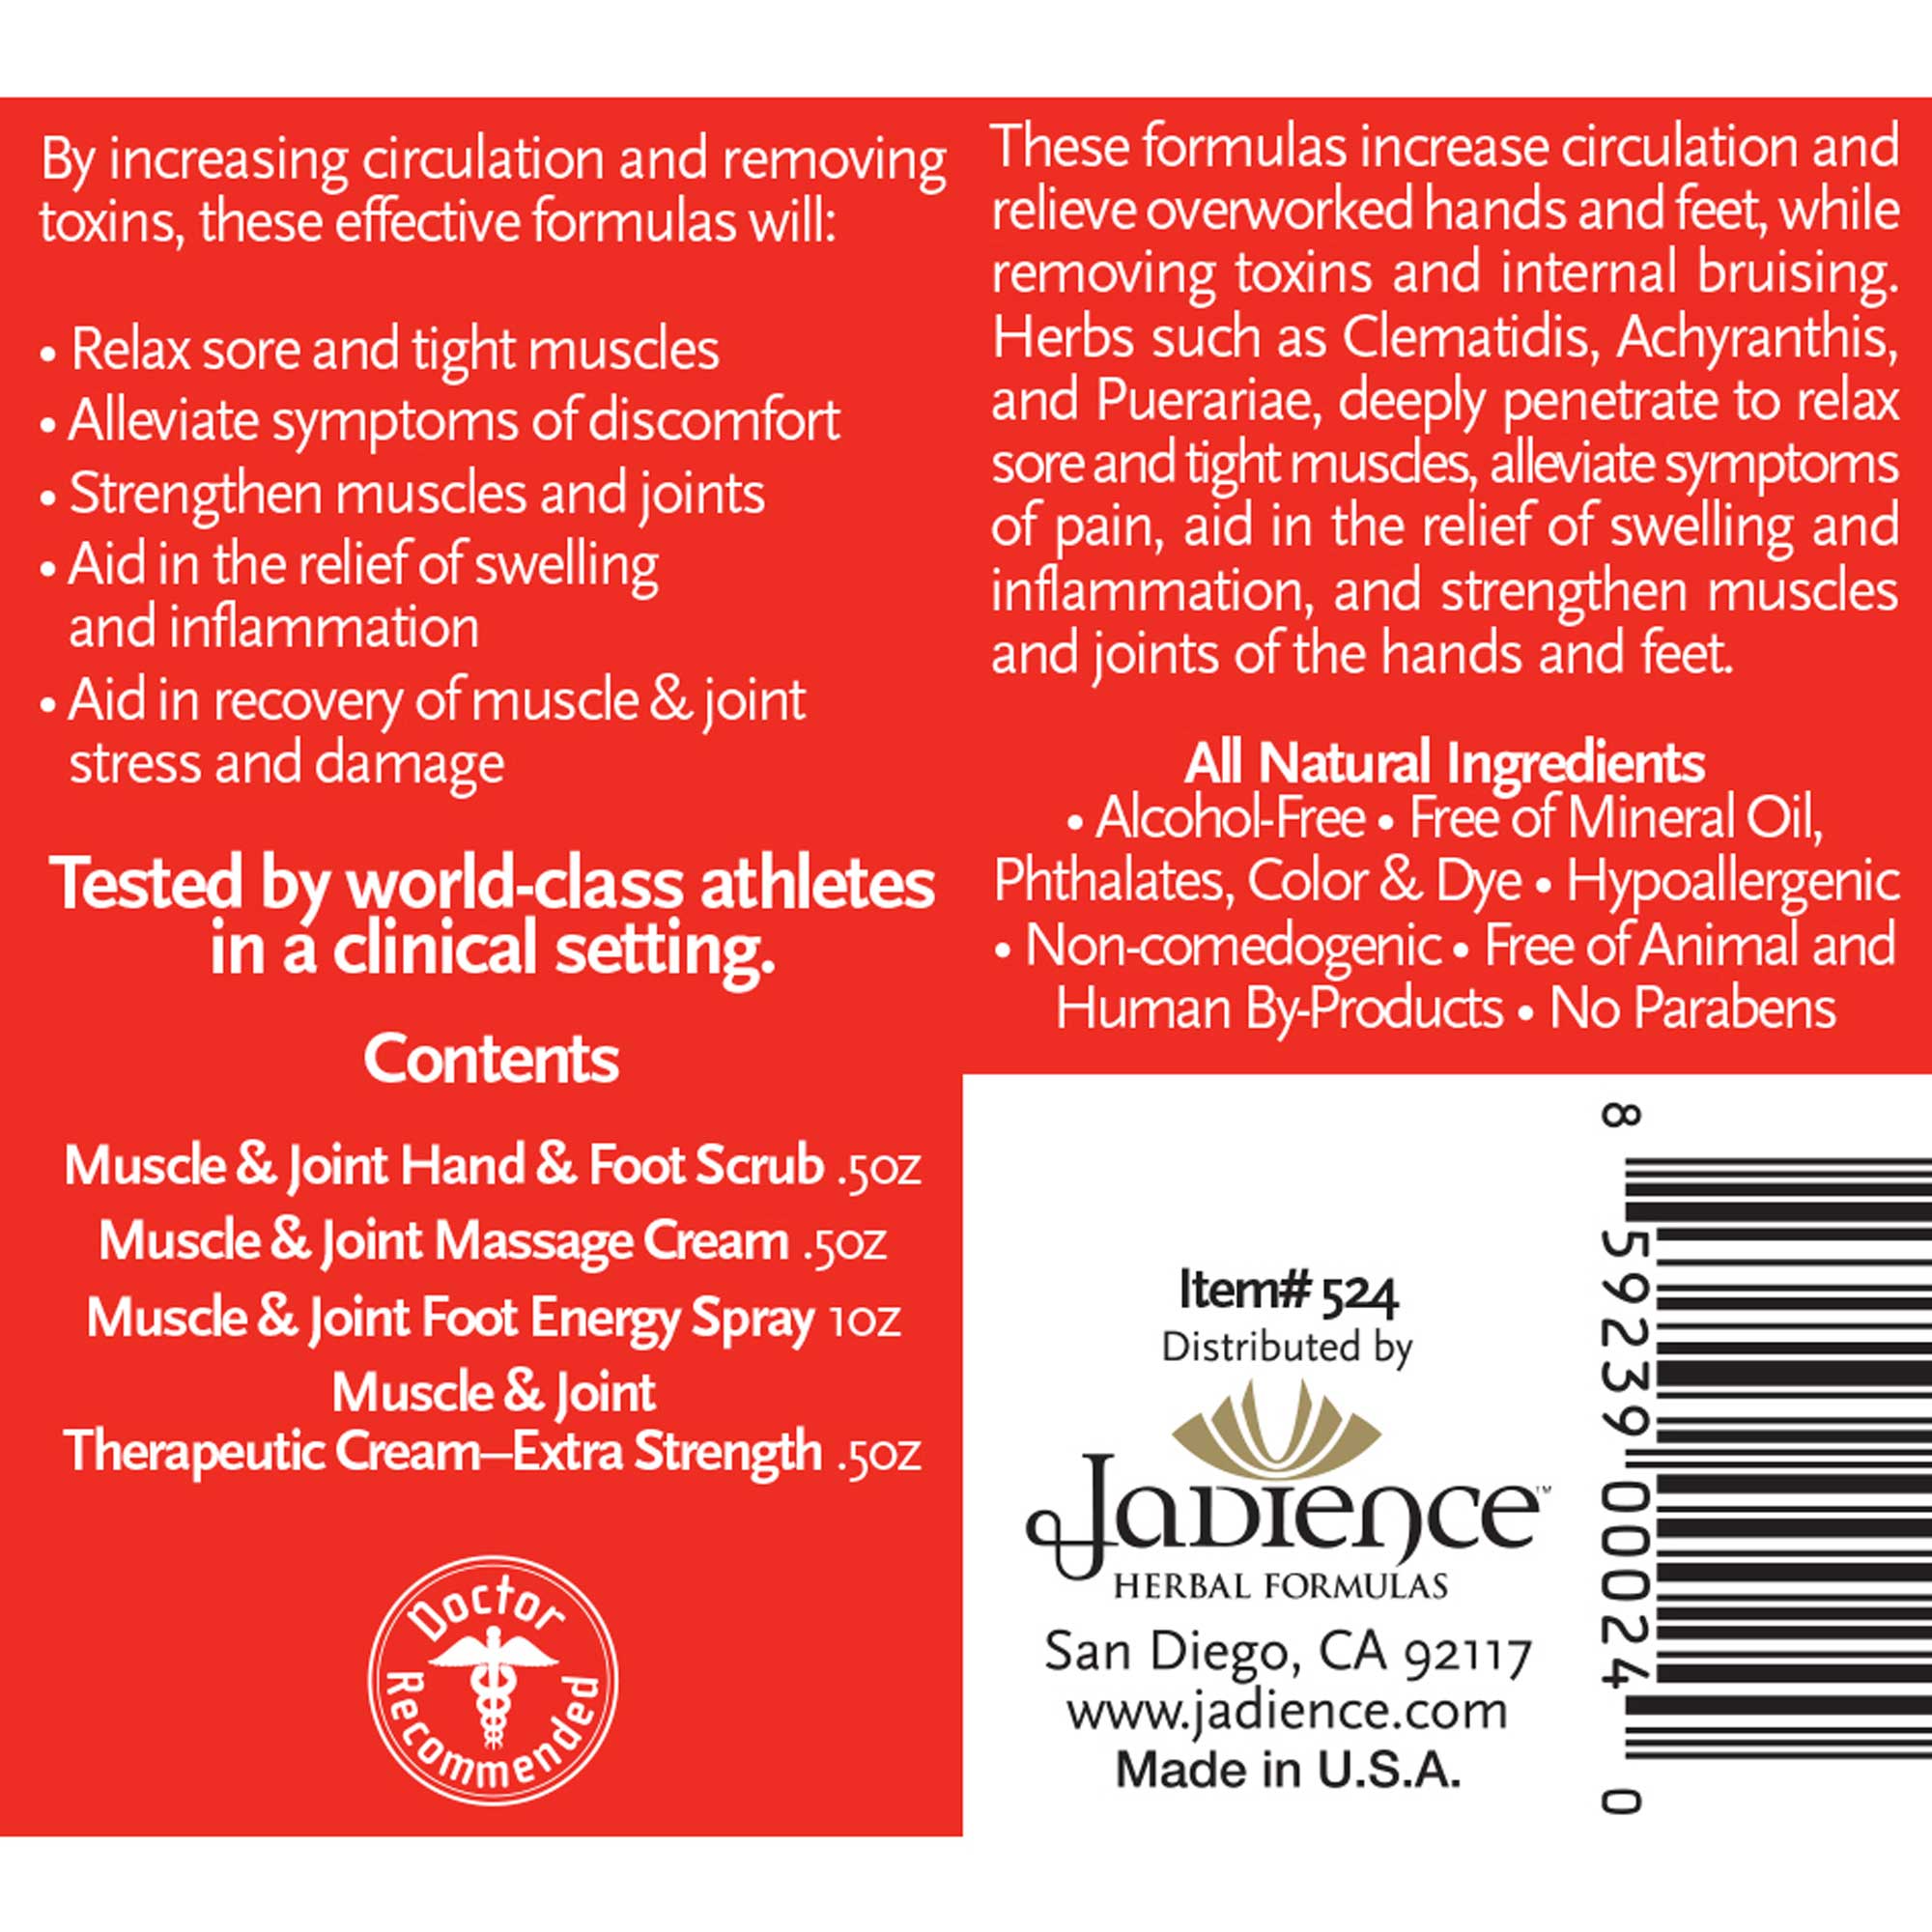 Jadience Herbal Formulas Muscle and Joint Therapeutic (Hand and Foot) Travel Kit Ingredients